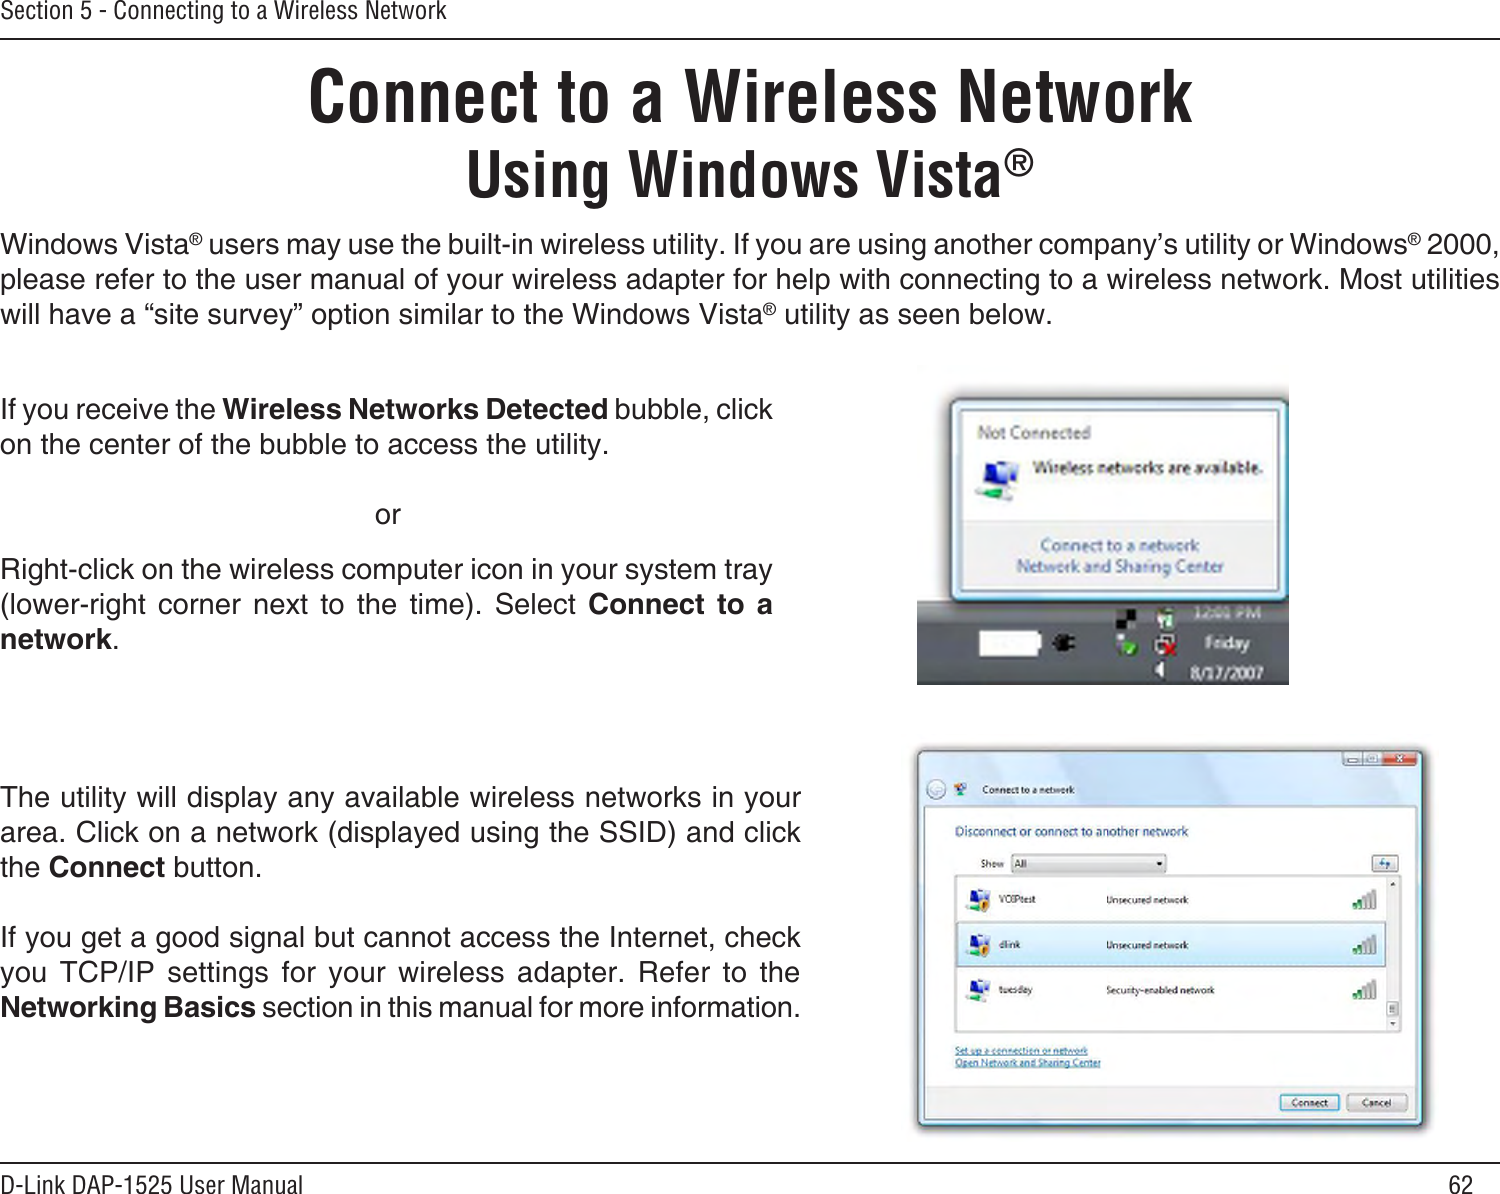 62D-Link DAP-1525 User ManualSection 5 - Connecting to a Wireless NetworkConnect to a Wireless NetworkUsing Windows Vista®Windows Vista® users may use the built-in wireless utility. If you are using another company’s utility or Windows® 2000, please refer to the user manual of your wireless adapter for help with connecting to a wireless network. Most utilities will have a “site survey” option similar to the Windows Vista® utility as seen below.Right-click on the wireless computer icon in your system tray (lower-right  corner  next  to  the  time).  Select  Connect  to  a network.If you receive the Wireless Networks Detected bubble, click on the center of the bubble to access the utility.     orThe utility will display any available wireless networks in your area. Click on a network (displayed using the SSID) and click the Connect button.If you get a good signal but cannot access the Internet, check you  TCP/IP  settings  for  your  wireless  adapter.  Refer  to  the Networking Basics section in this manual for more information.